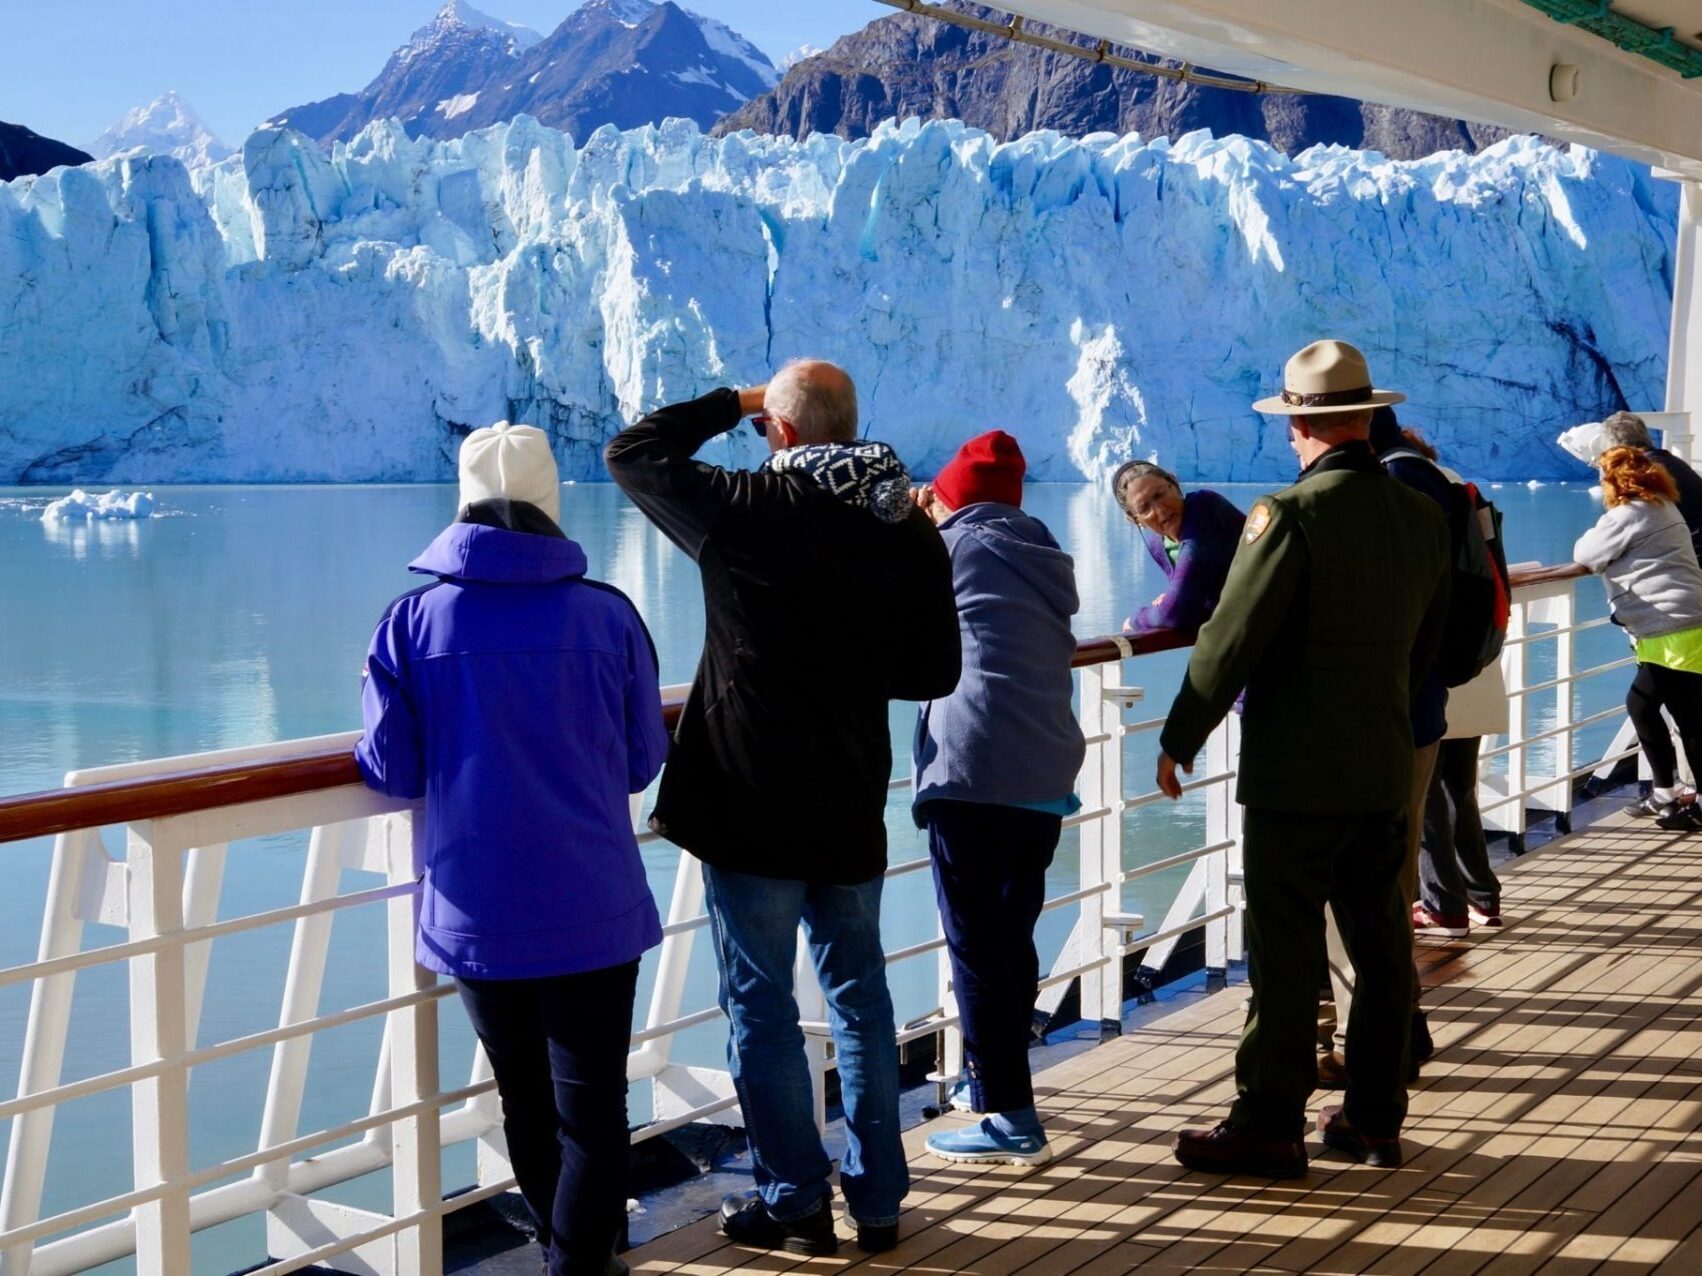 Navigating Alaskan Cruises: What to Wear Onboard? Alaskan Cruise Discover the perfect Alaskan Cruise Attire for your next adventure! From cozy layers for deck walks to chic outfits for formal nights, we've got all the tips to ensure you're stylishly prepared for every onboard occasion. Explore now